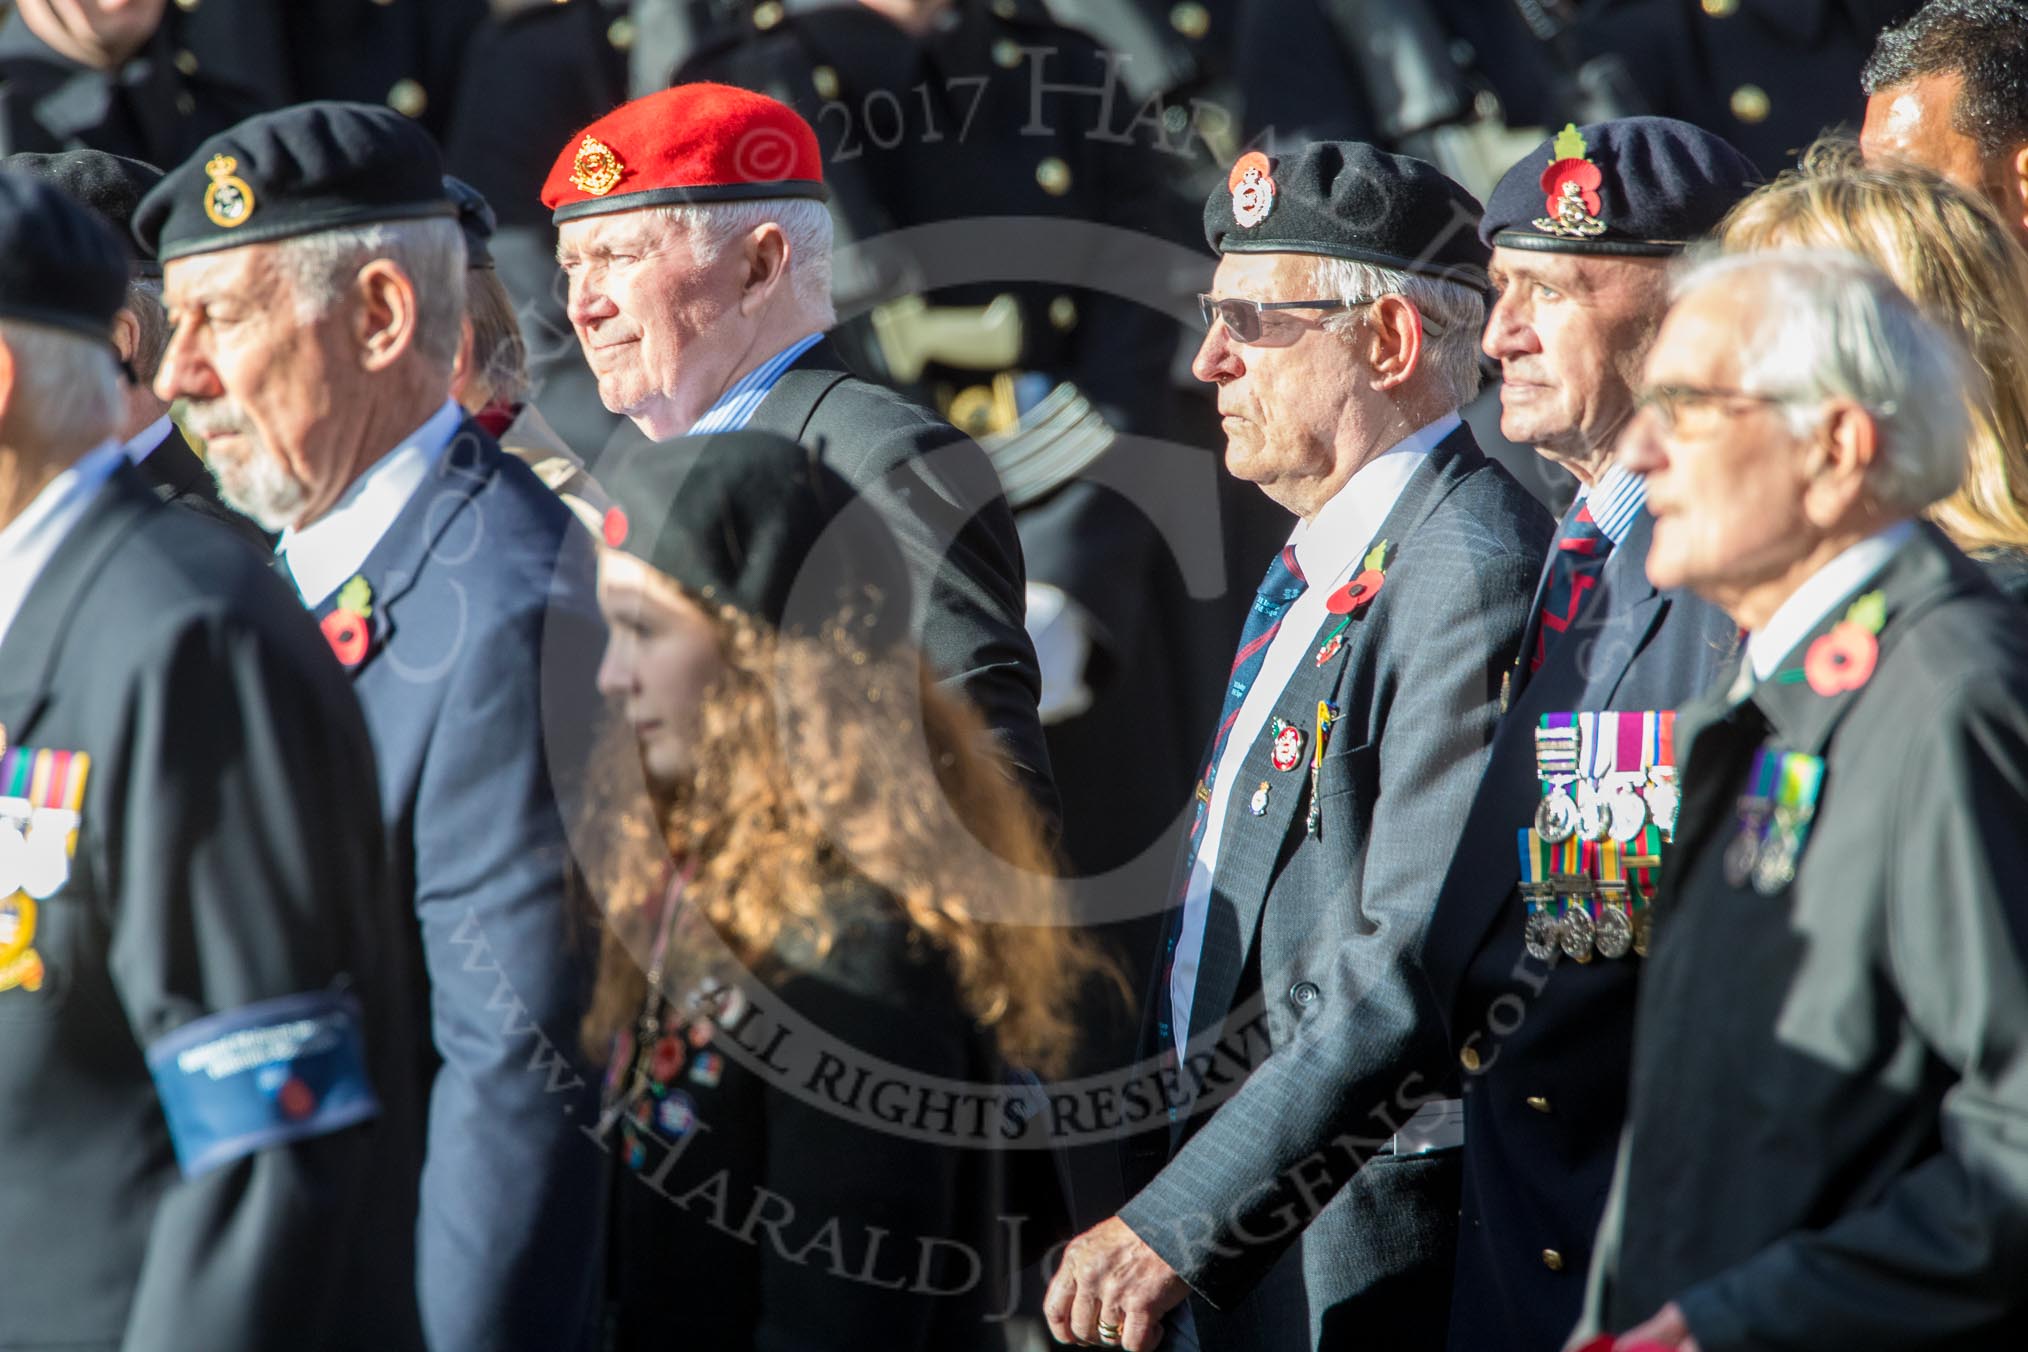 National Malay and Borneo Veterans Association  (Group F12, 76 members) during the Royal British Legion March Past on Remembrance Sunday at the Cenotaph, Whitehall, Westminster, London, 11 November 2018, 11:51.